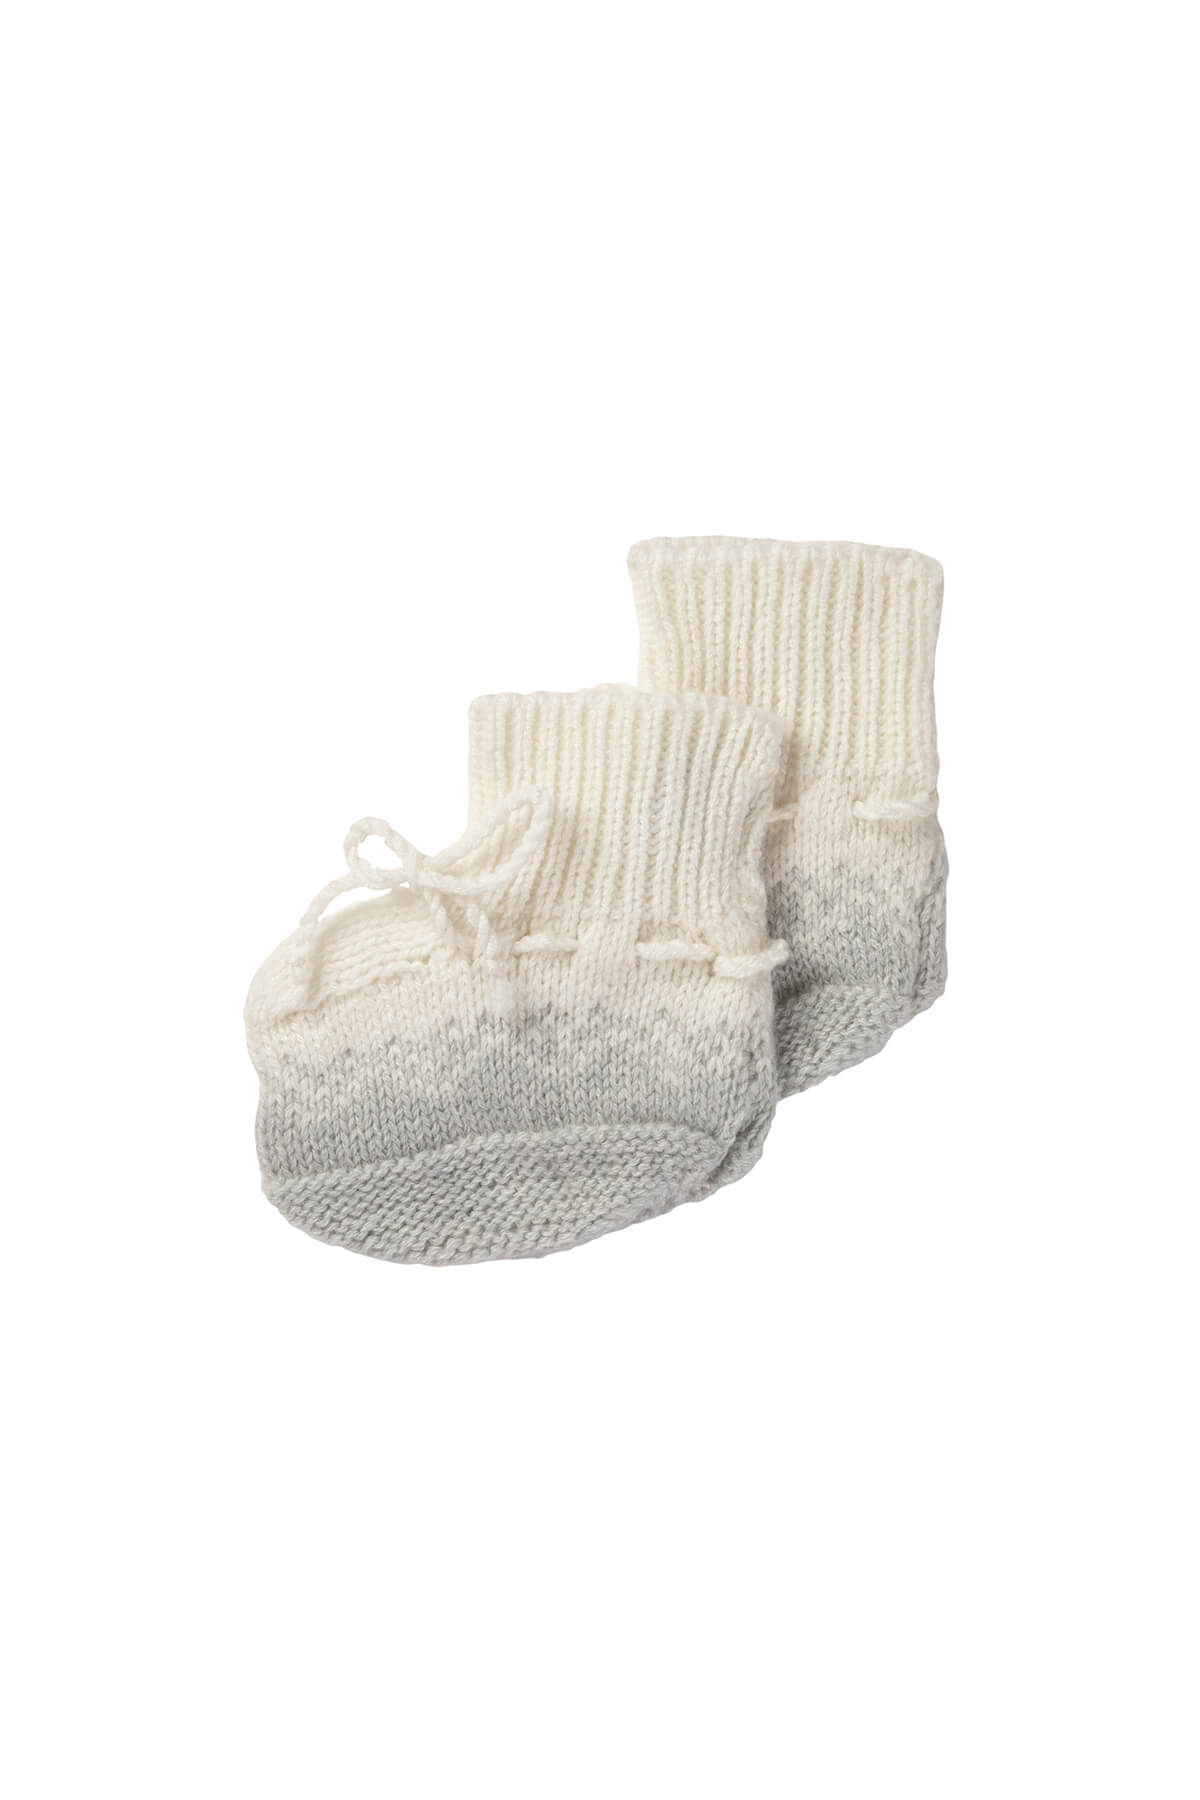 Johnstons of Elgin Gift Set includes our Cashmere Ombre Baby Hat, Mittens & Booties in Pumice AW21GIFTSET22A